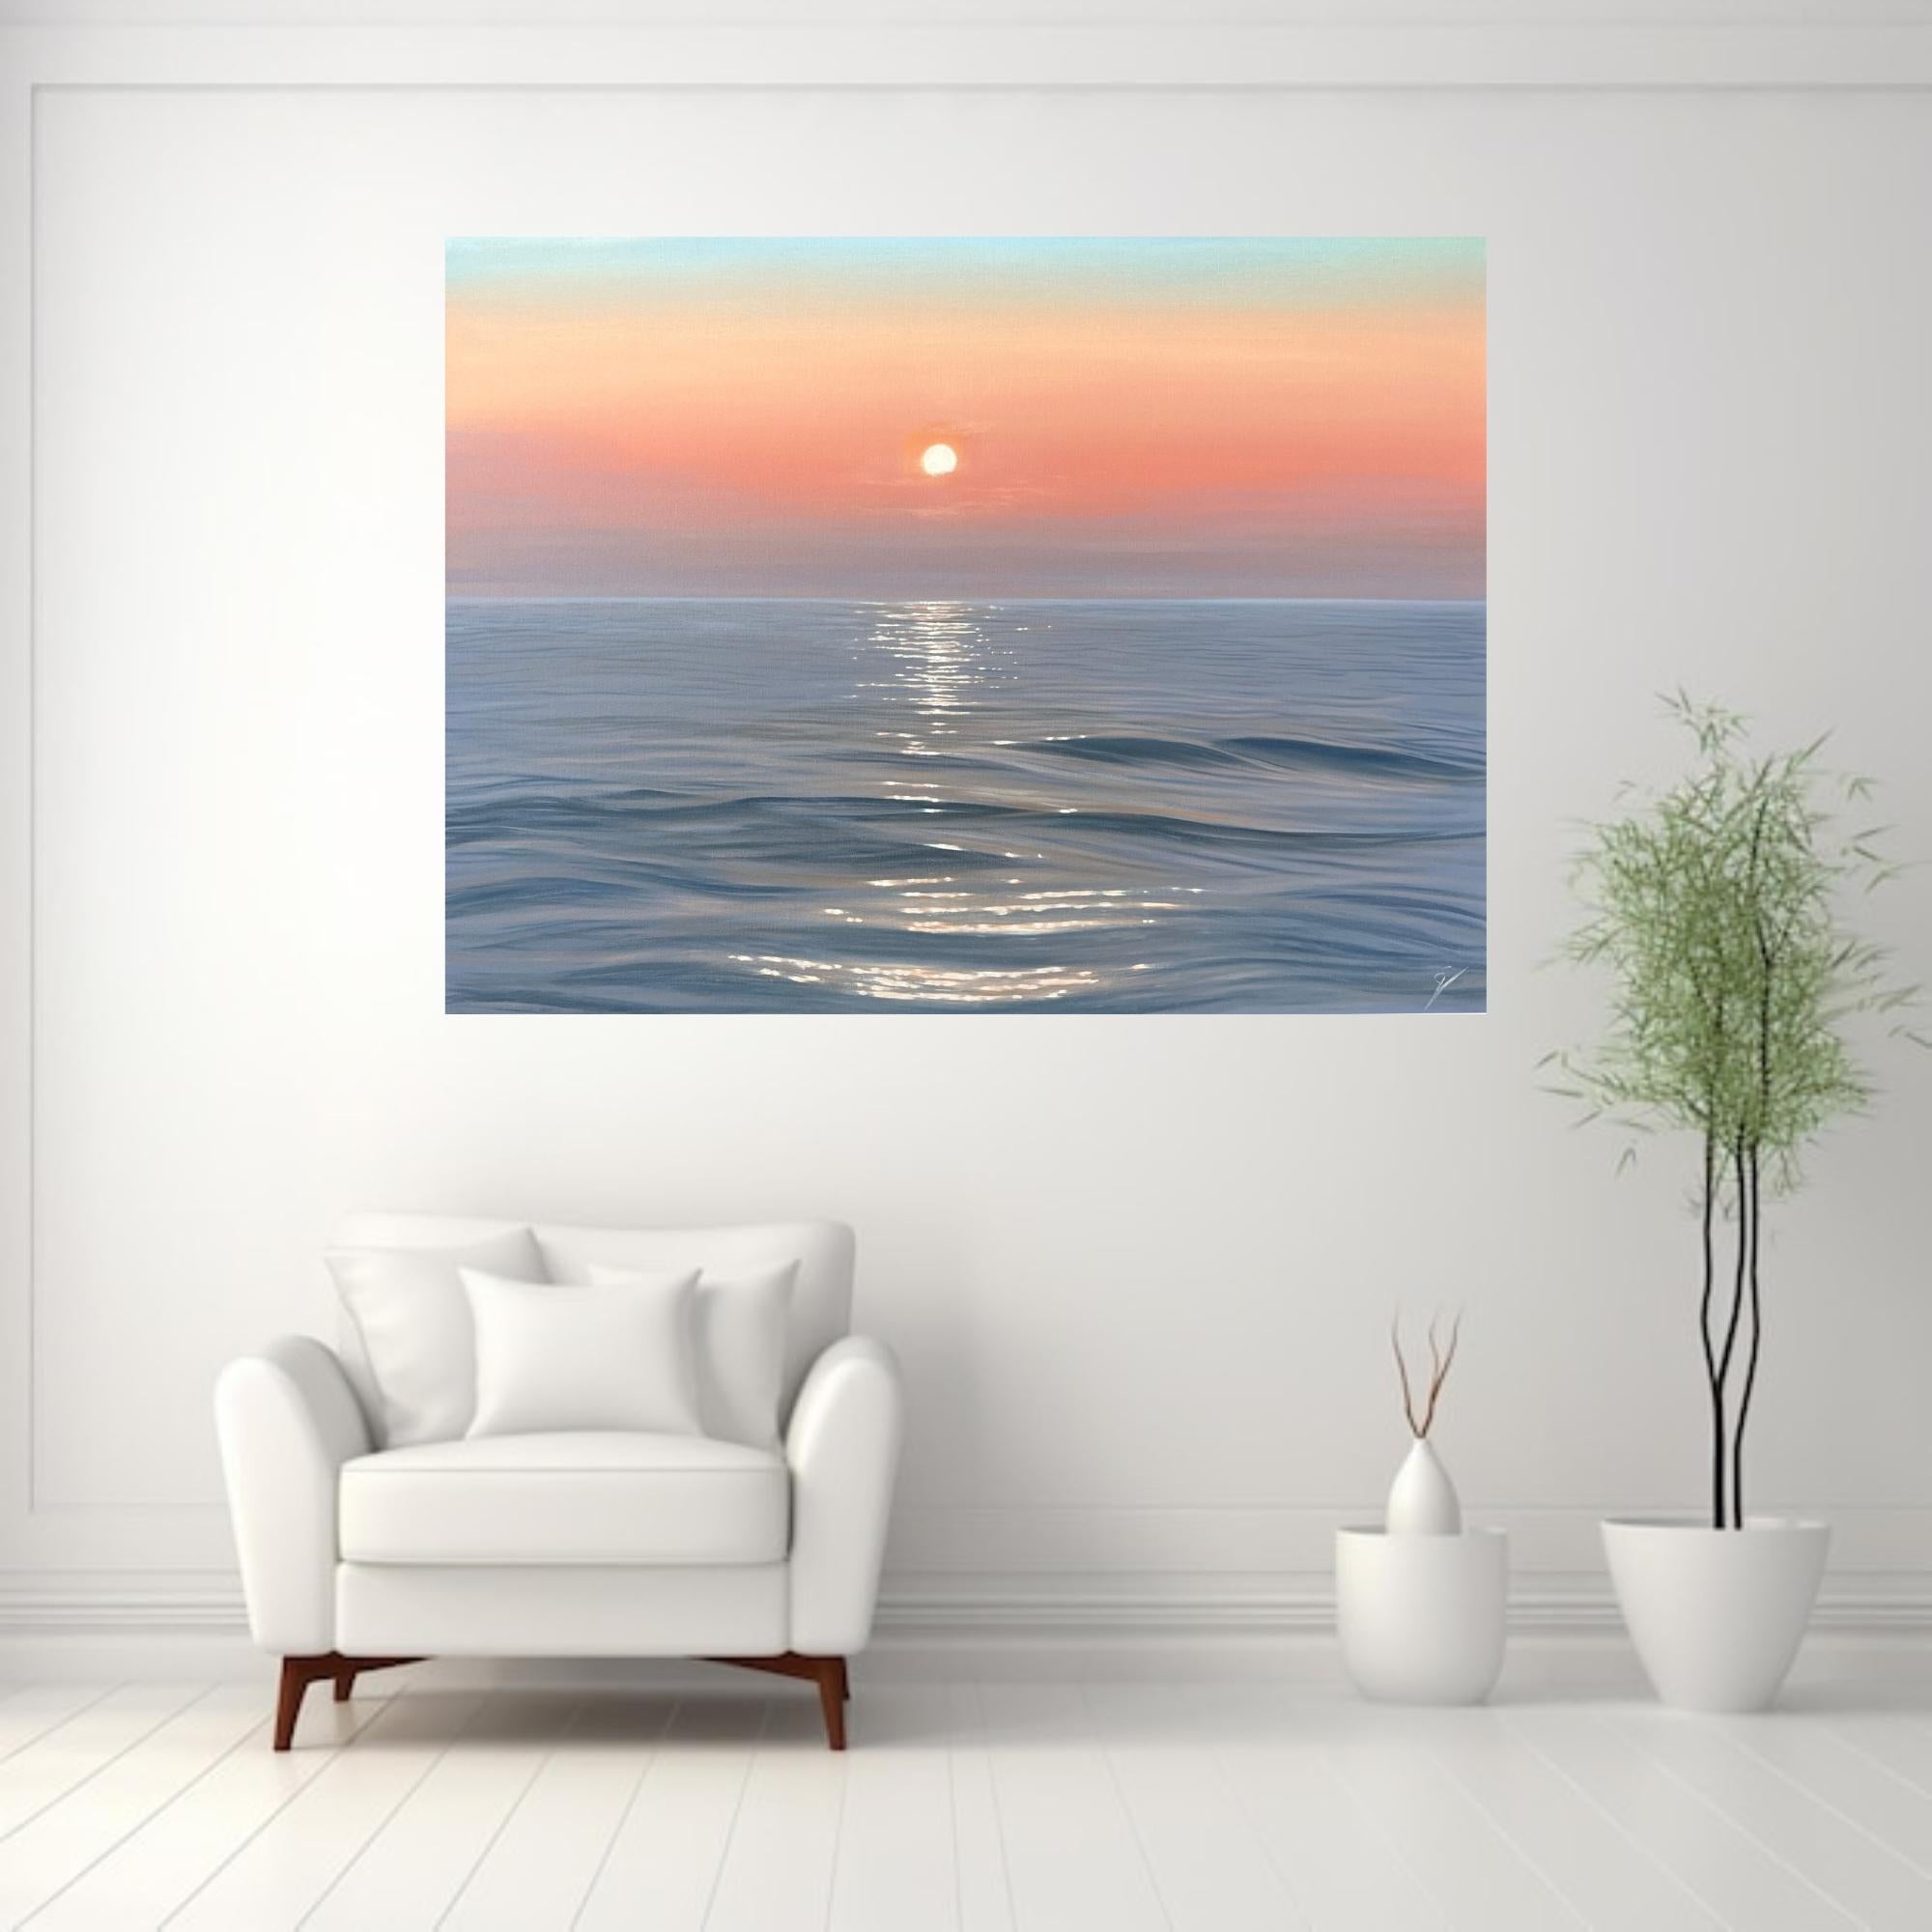 Changing Chapters-original seascape sunset oil painting-artwork-contemporary art - Painting by Eva Volf